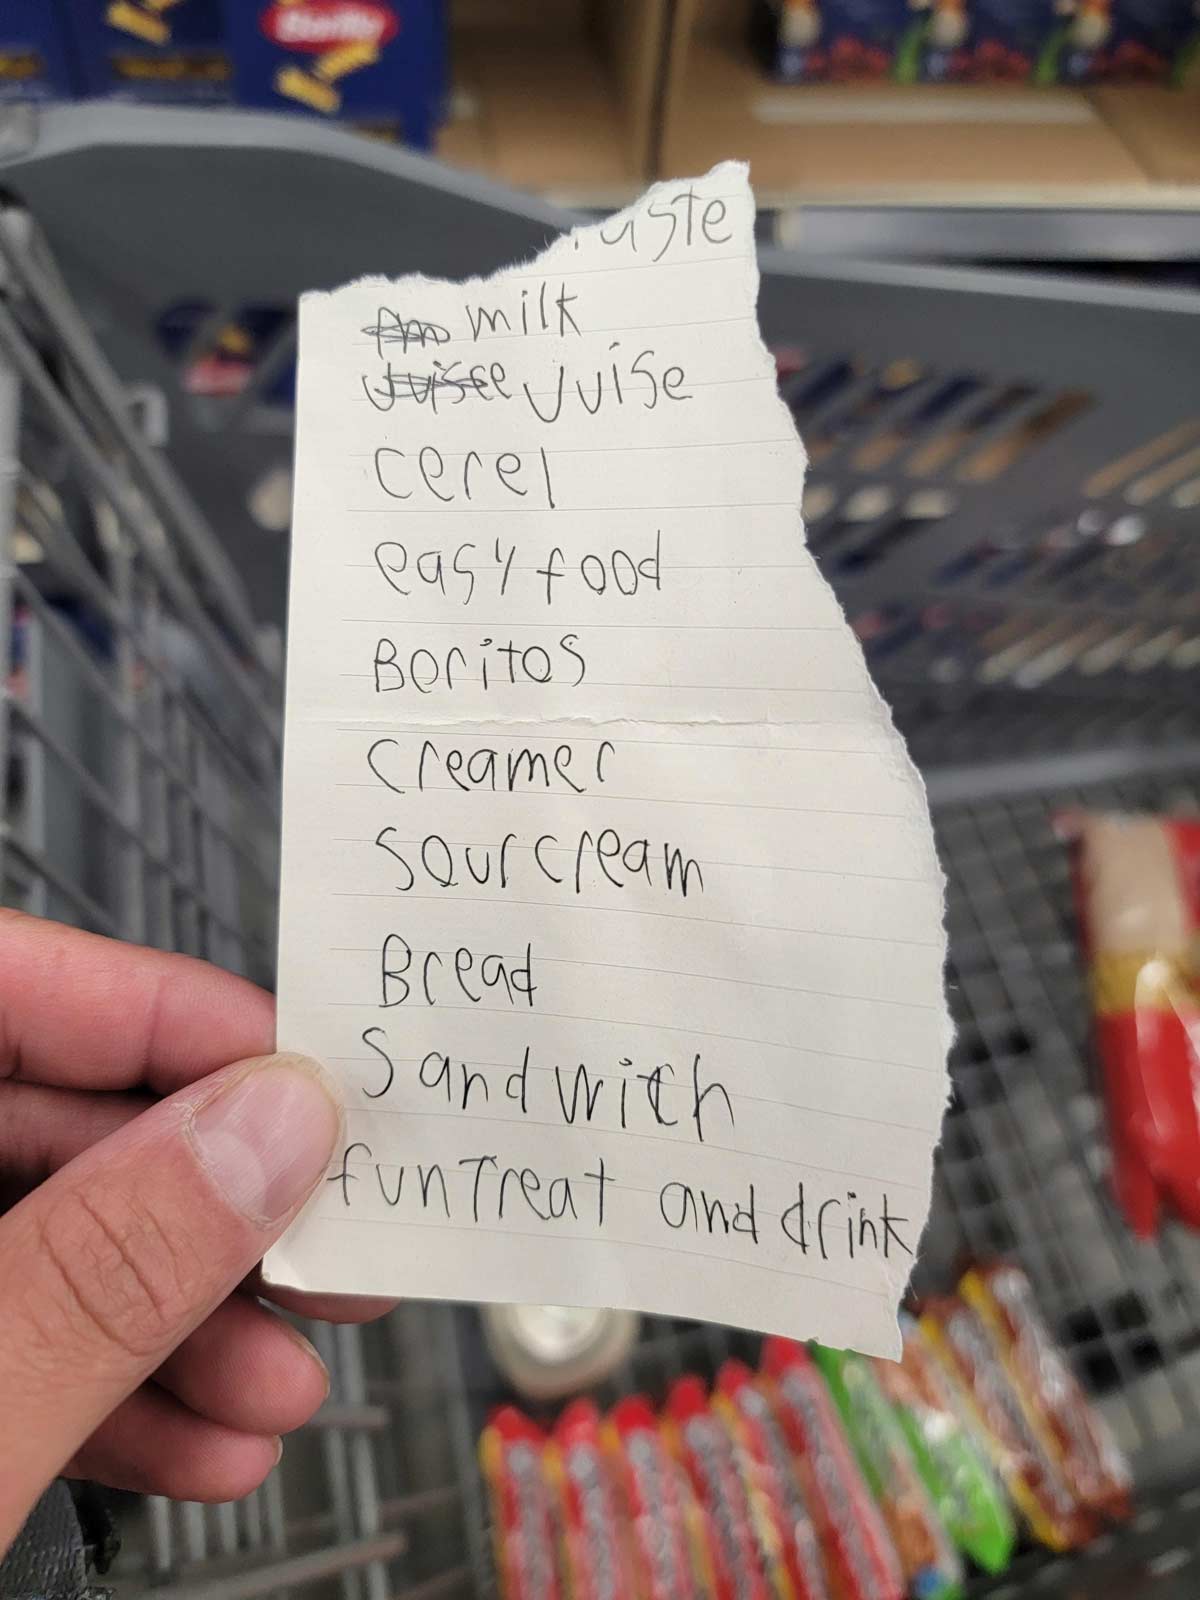 Found this grocery list in my cart